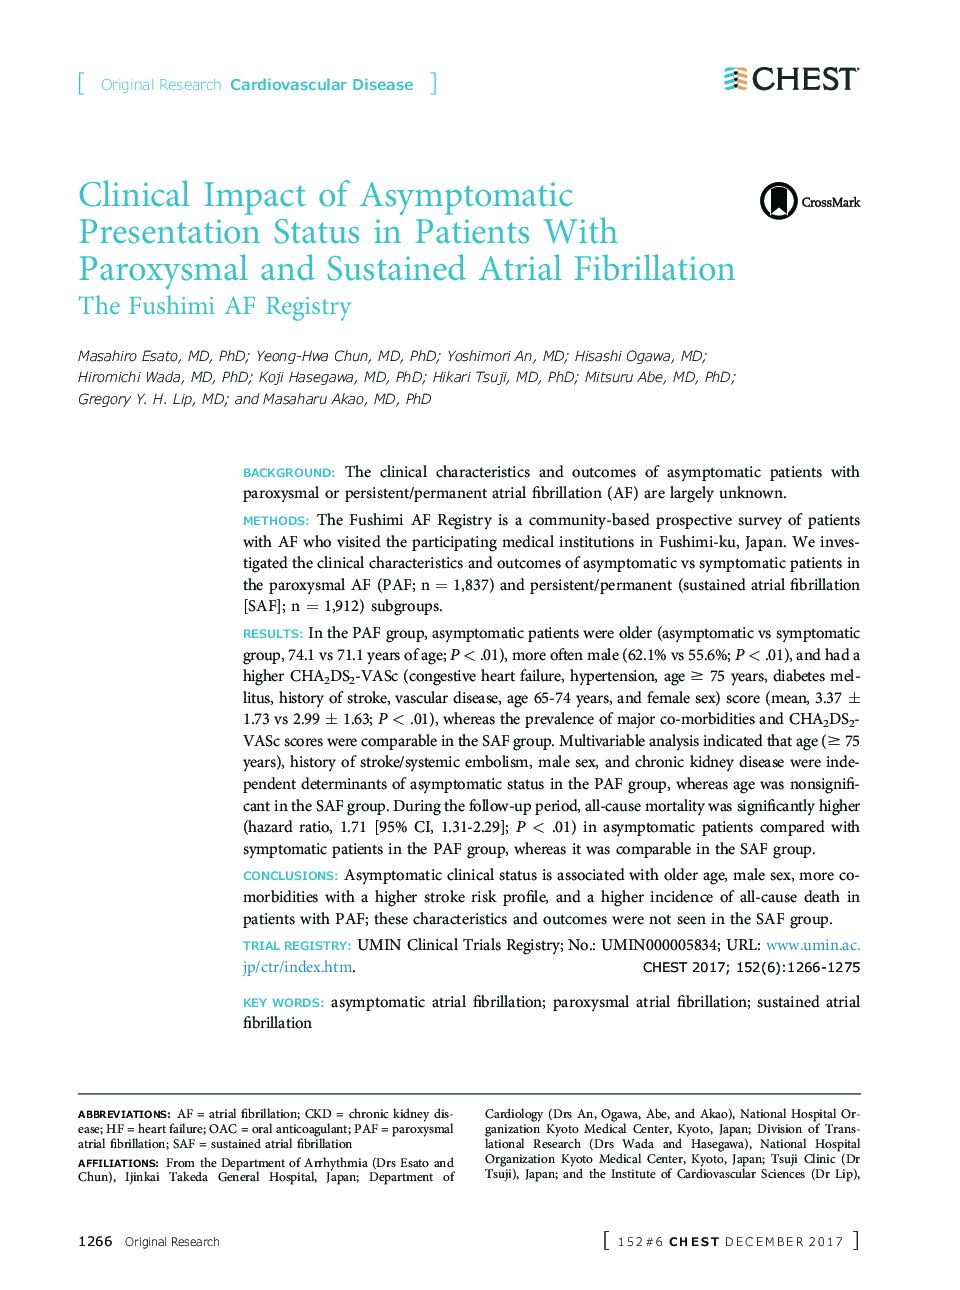 Clinical Impact of Asymptomatic Presentation Status in Patients With Paroxysmal and Sustained Atrial Fibrillation